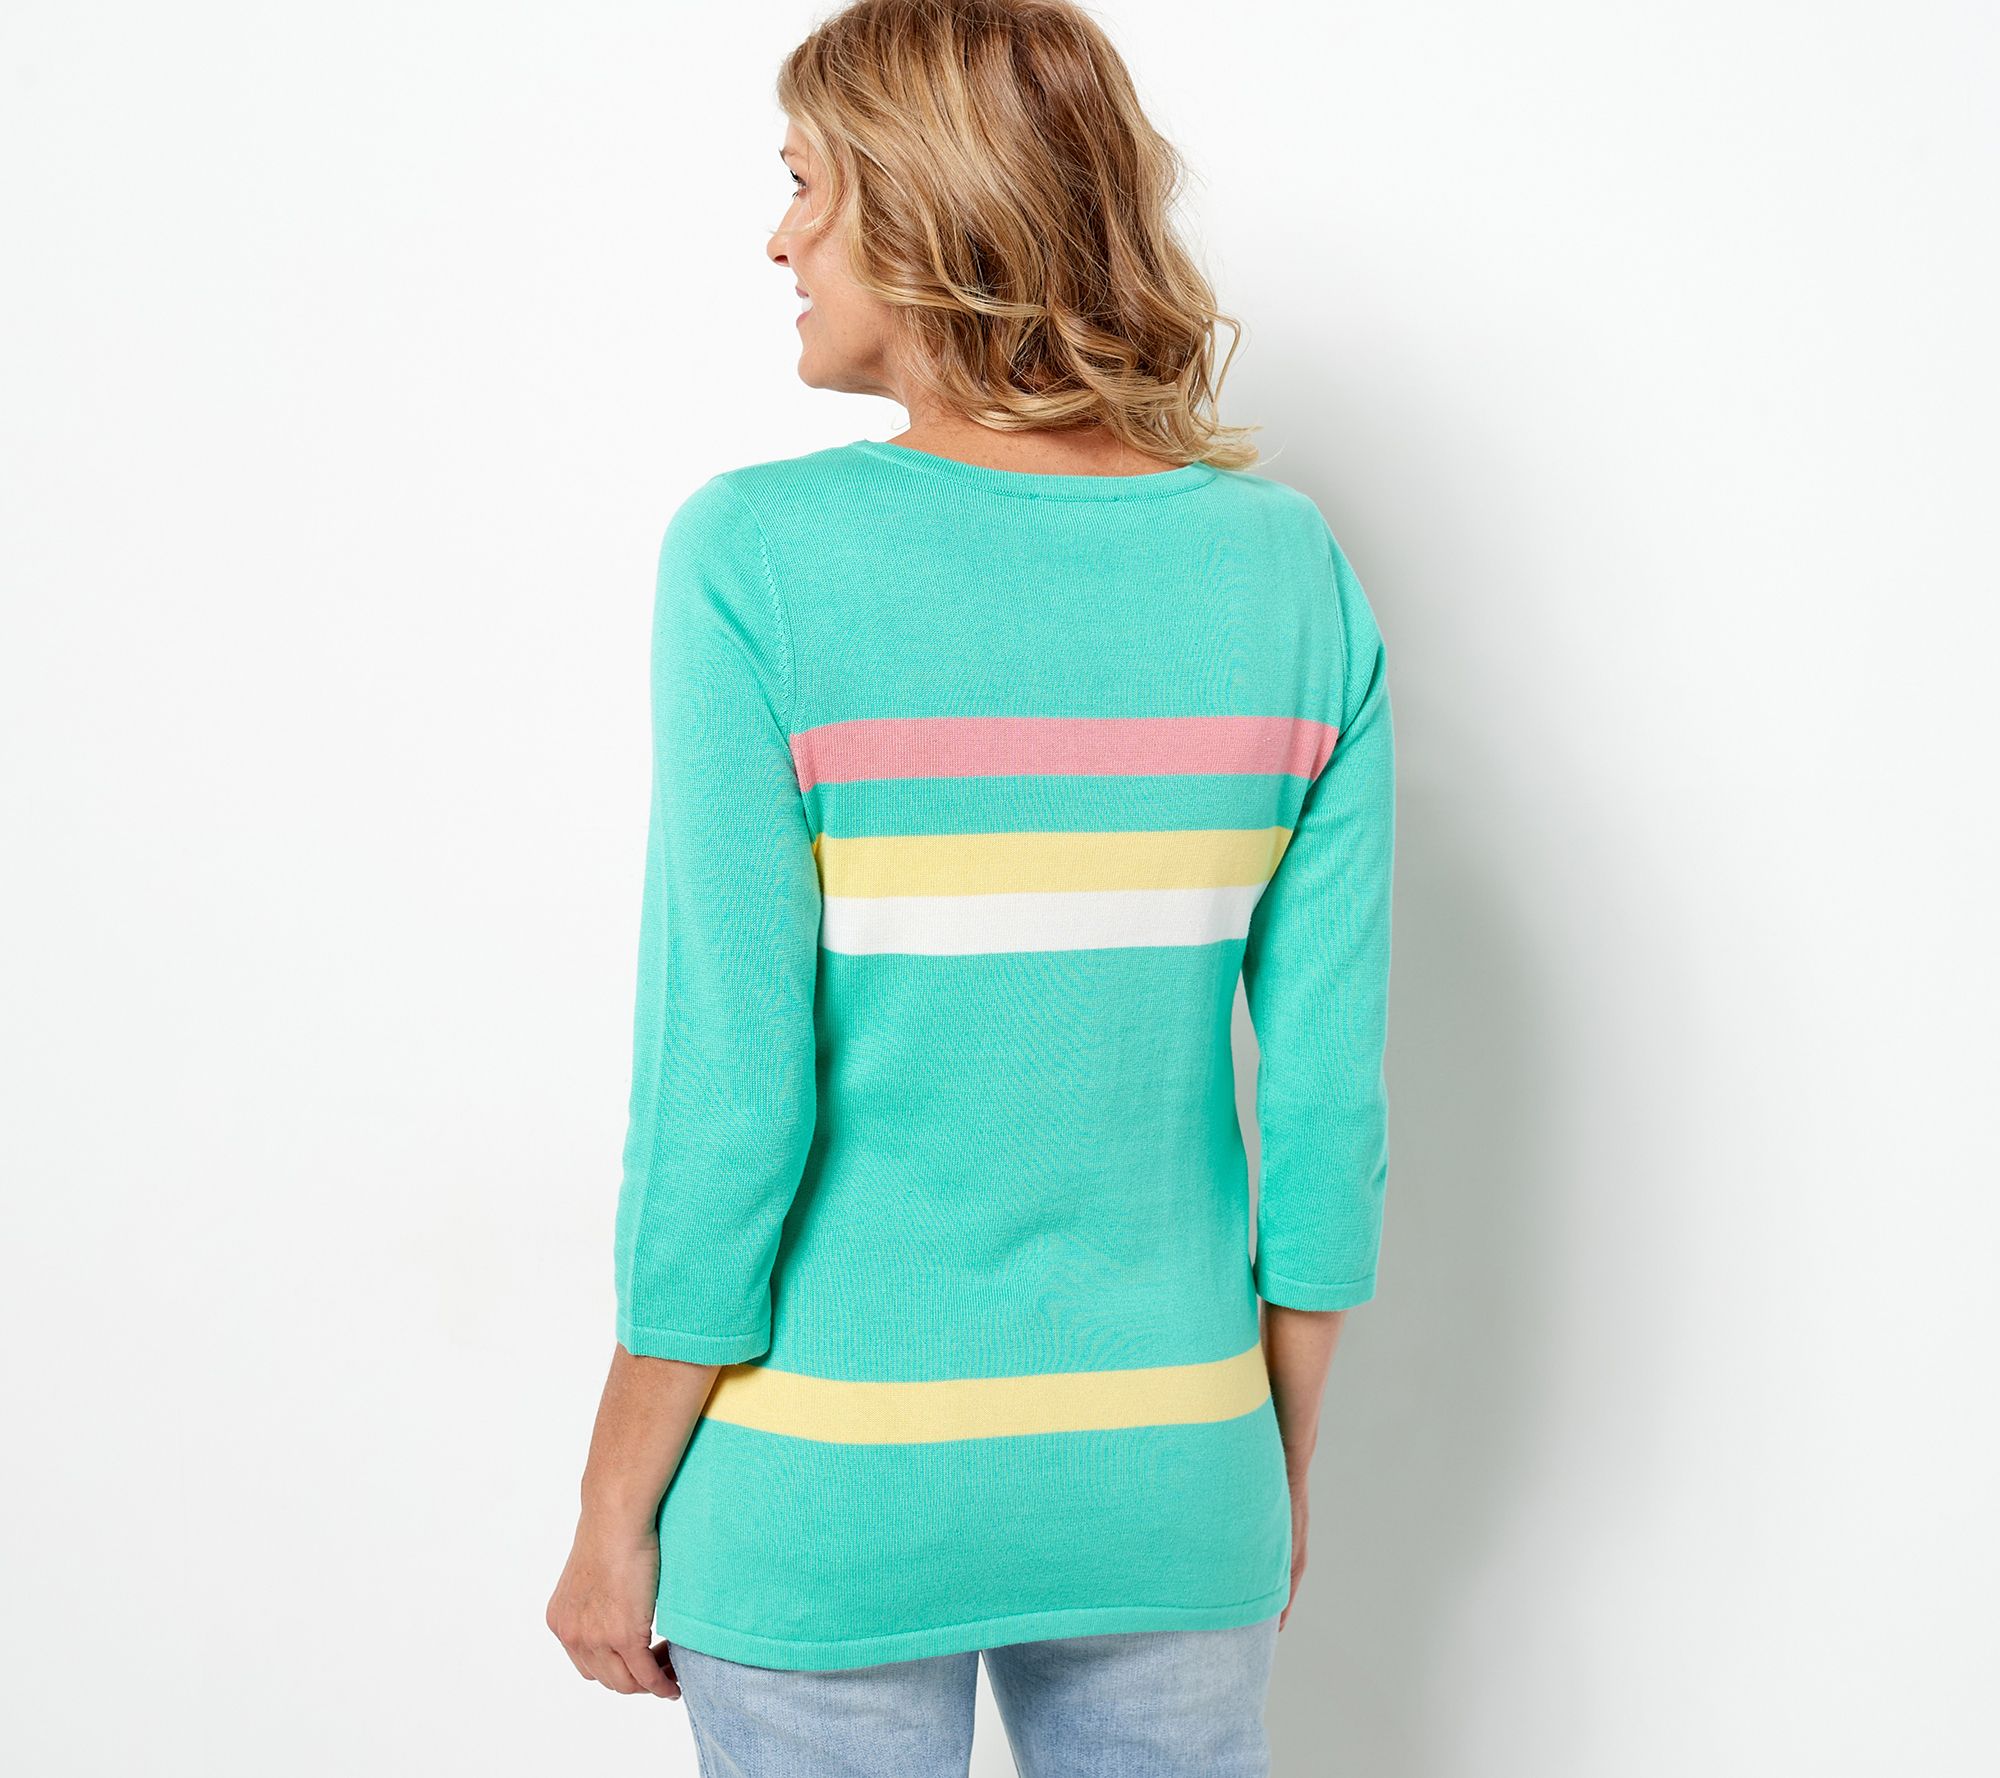 Roxy Juniors Loose Ends Pullover Sweater